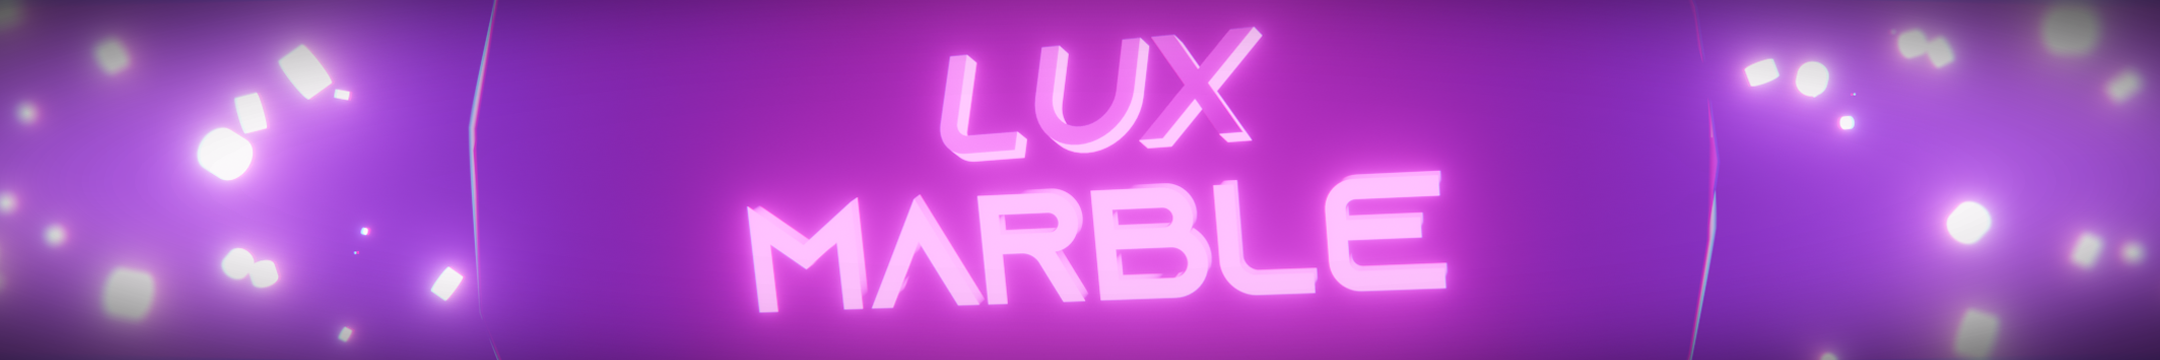 LUX MARBLE